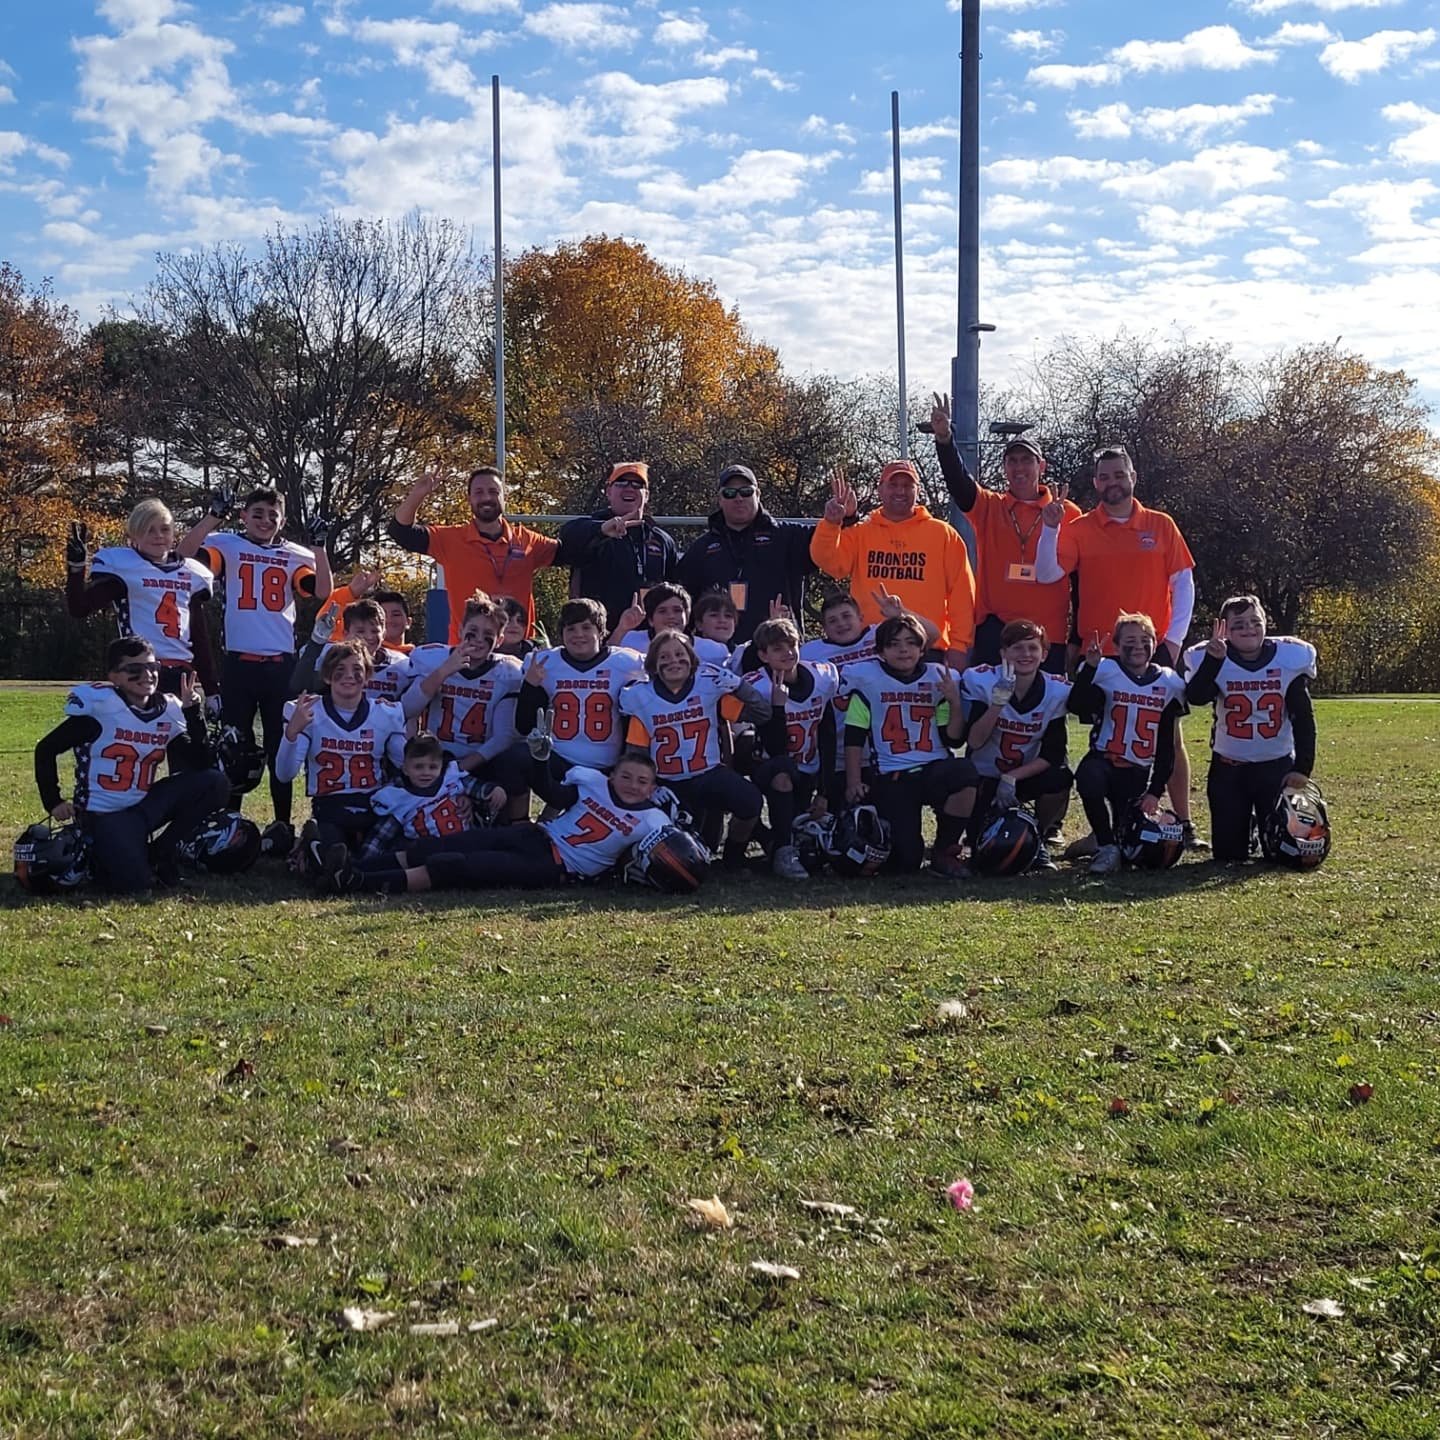 The Seaford Broncos became two-time Nassau County Youth Football League champions last month after defeating the East Rockaway Raiders at Mitchell Field in Uniondale on Nov. 21.